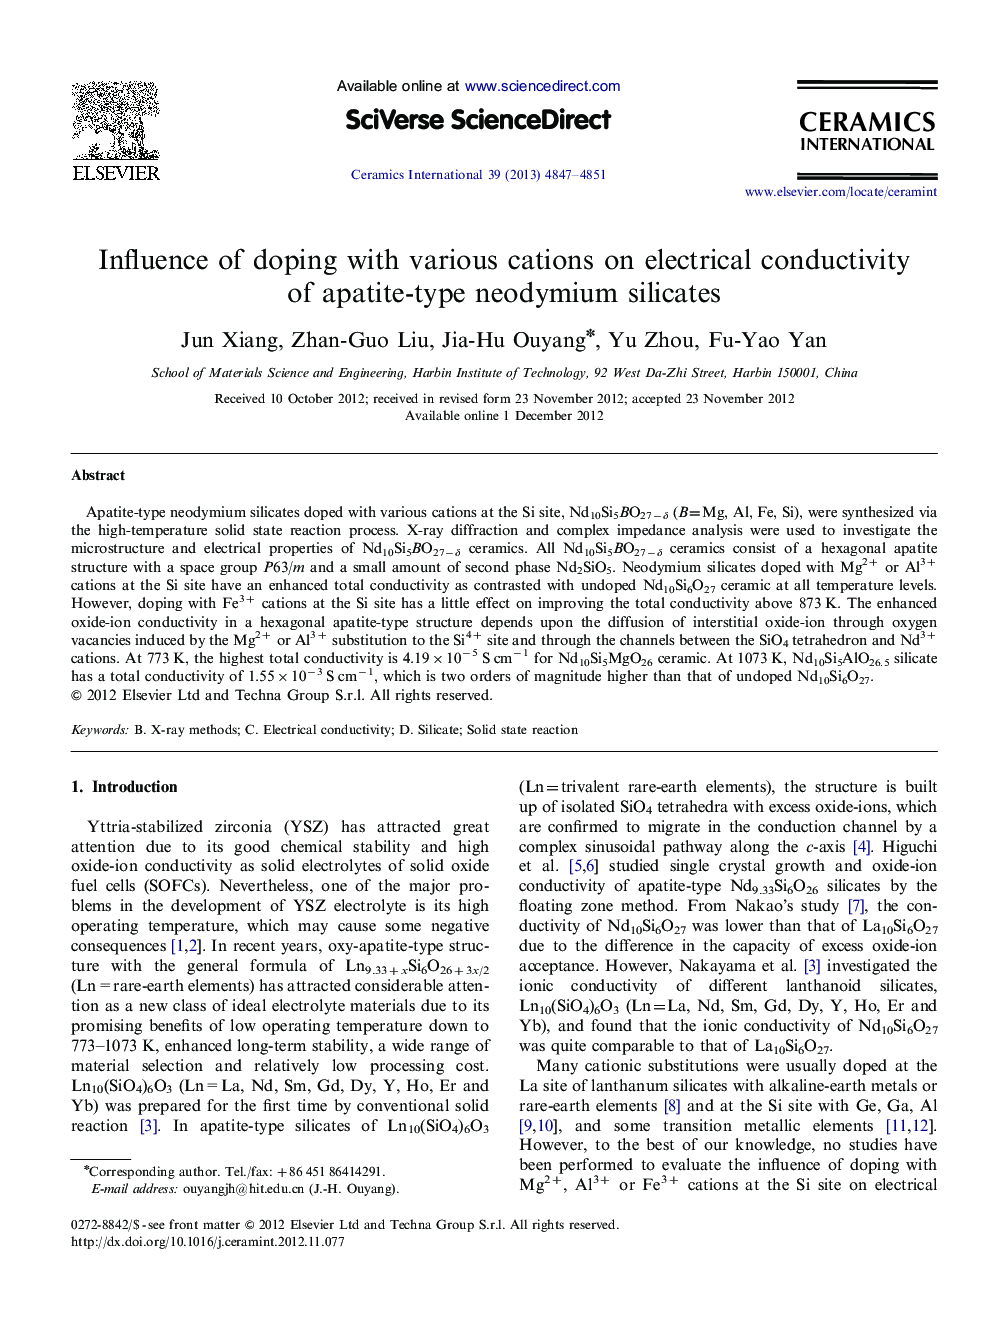 Influence of doping with various cations on electrical conductivity of apatite-type neodymium silicates